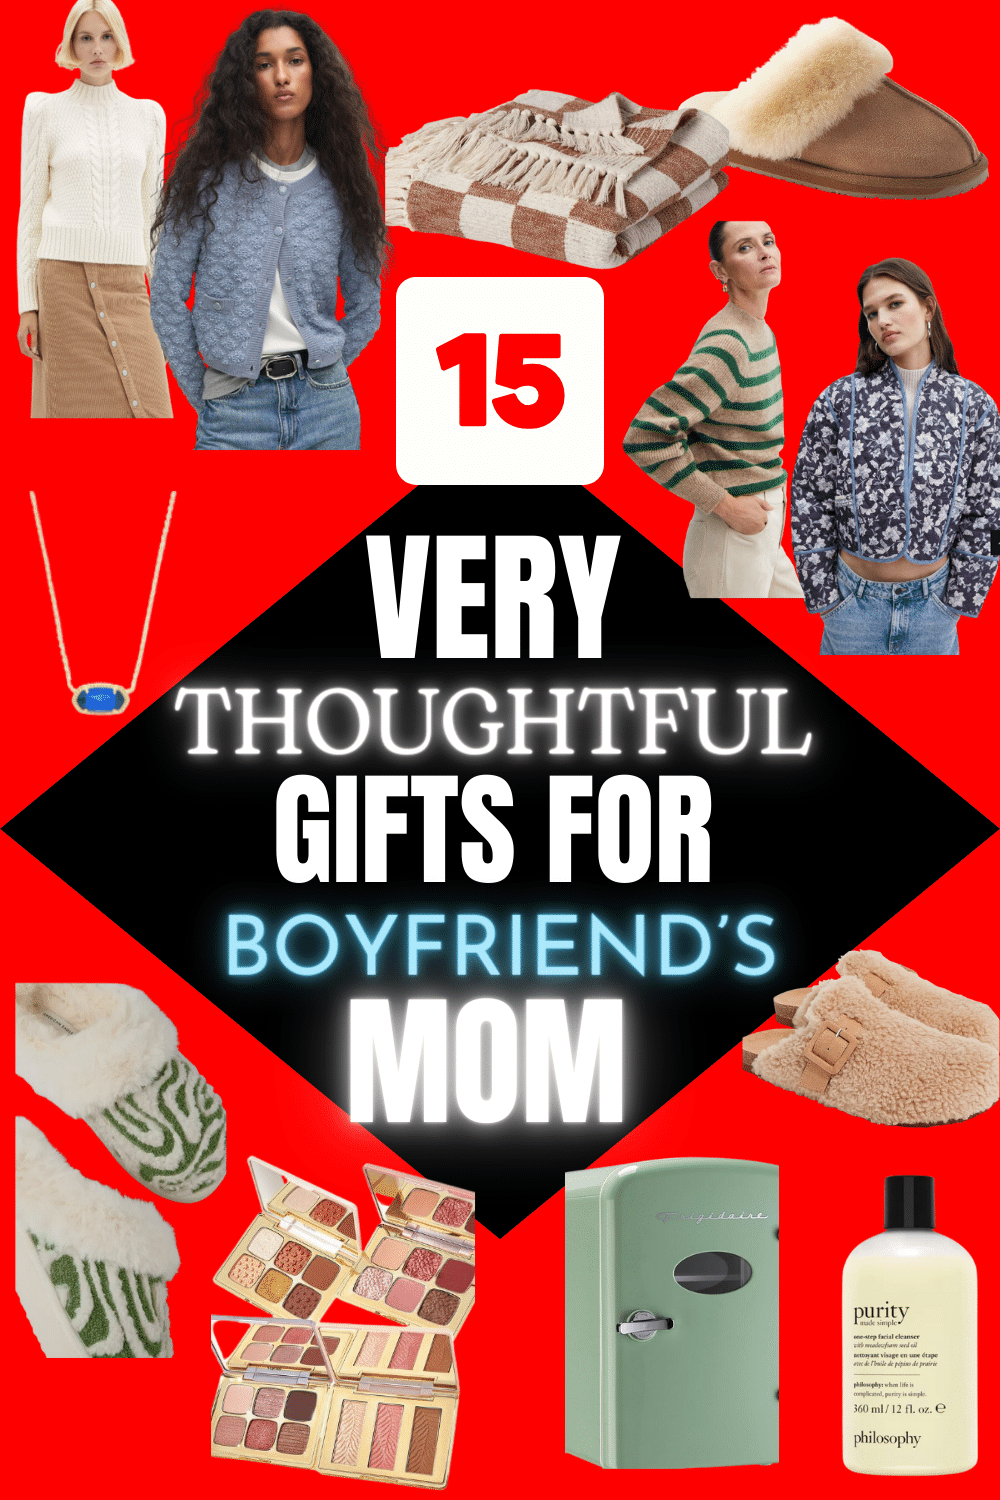 Practical Christmas Gifts For Boyfriends Mom  Boyfriends mom gifts,  Practical christmas gift, Christmas gifts for boyfriend